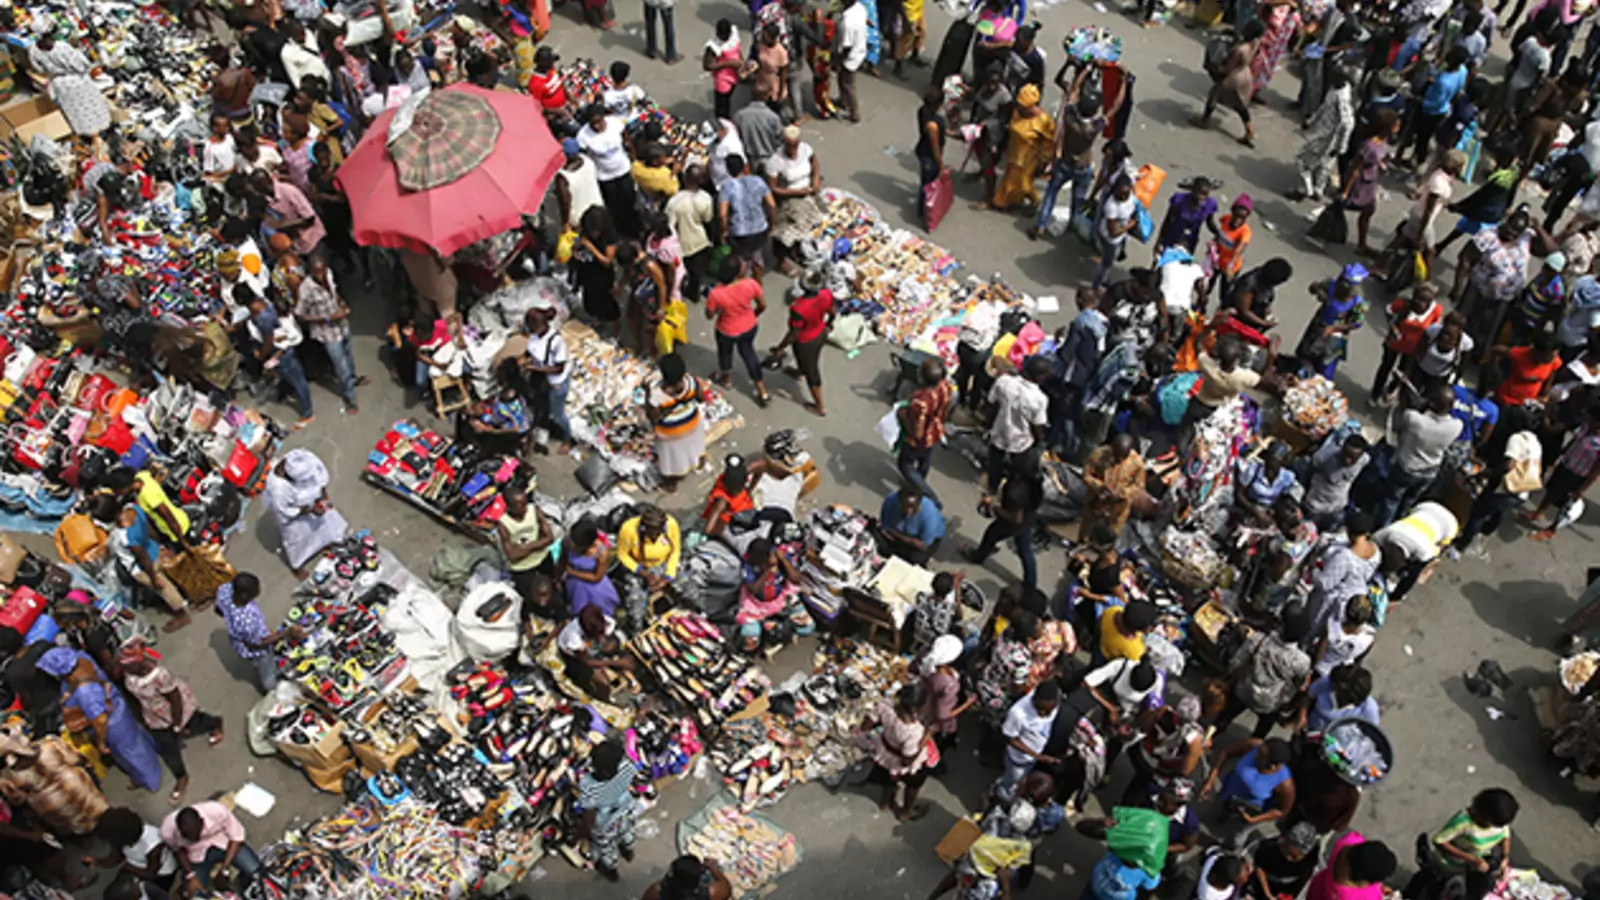 A crowded market square in the Nigerian city of Lagos.